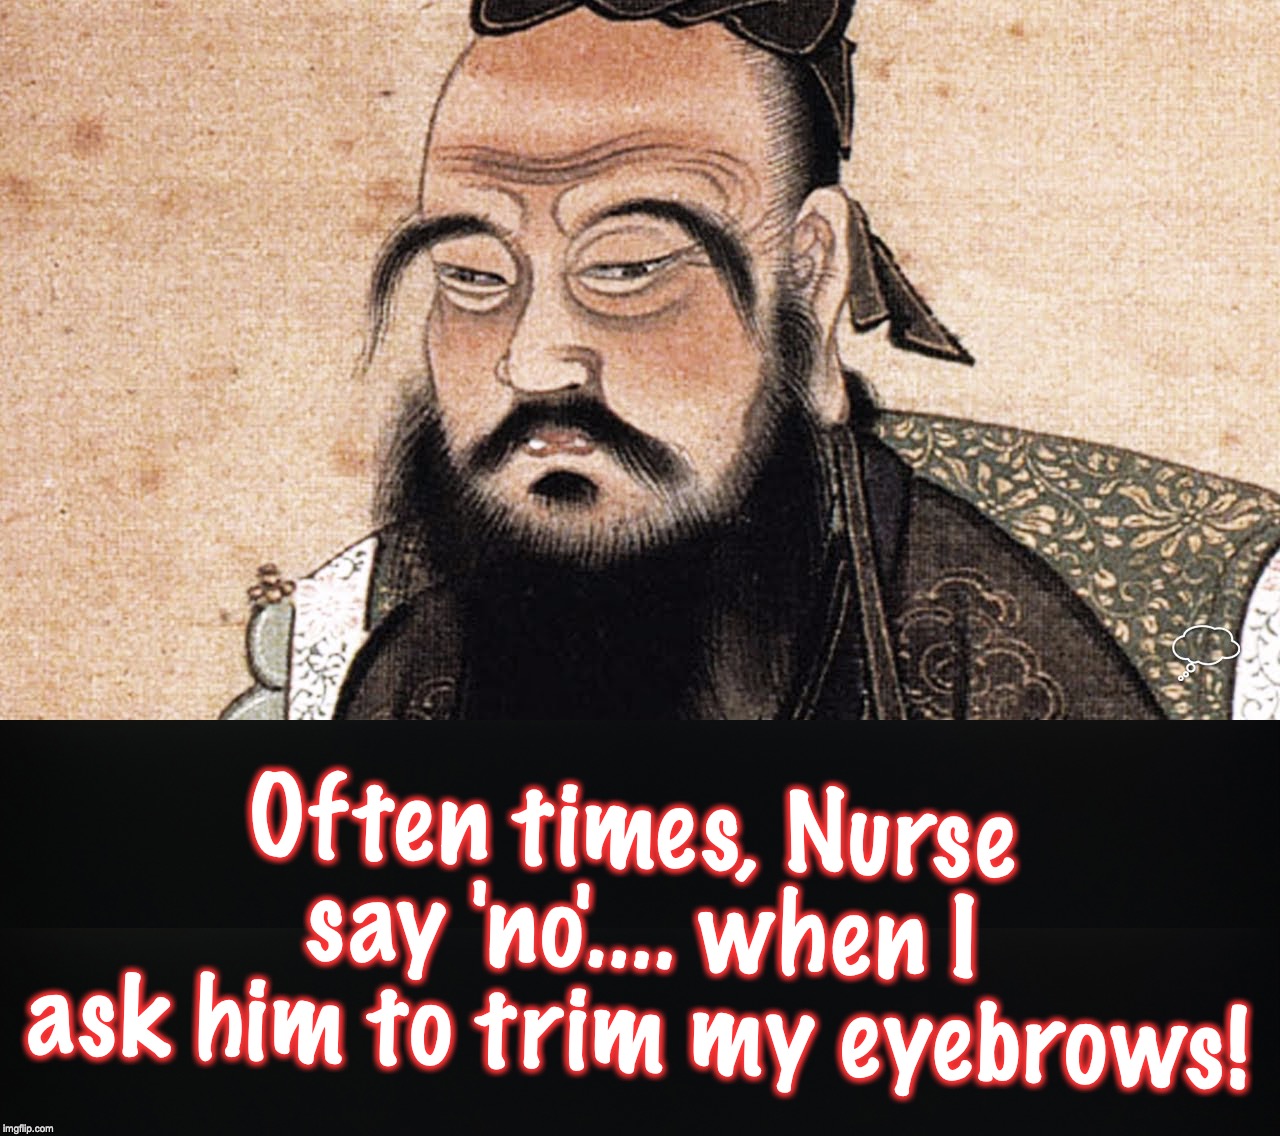 Often times, Nurse say 'no'.... when I ask him to trim my eyebrows! | made w/ Imgflip meme maker